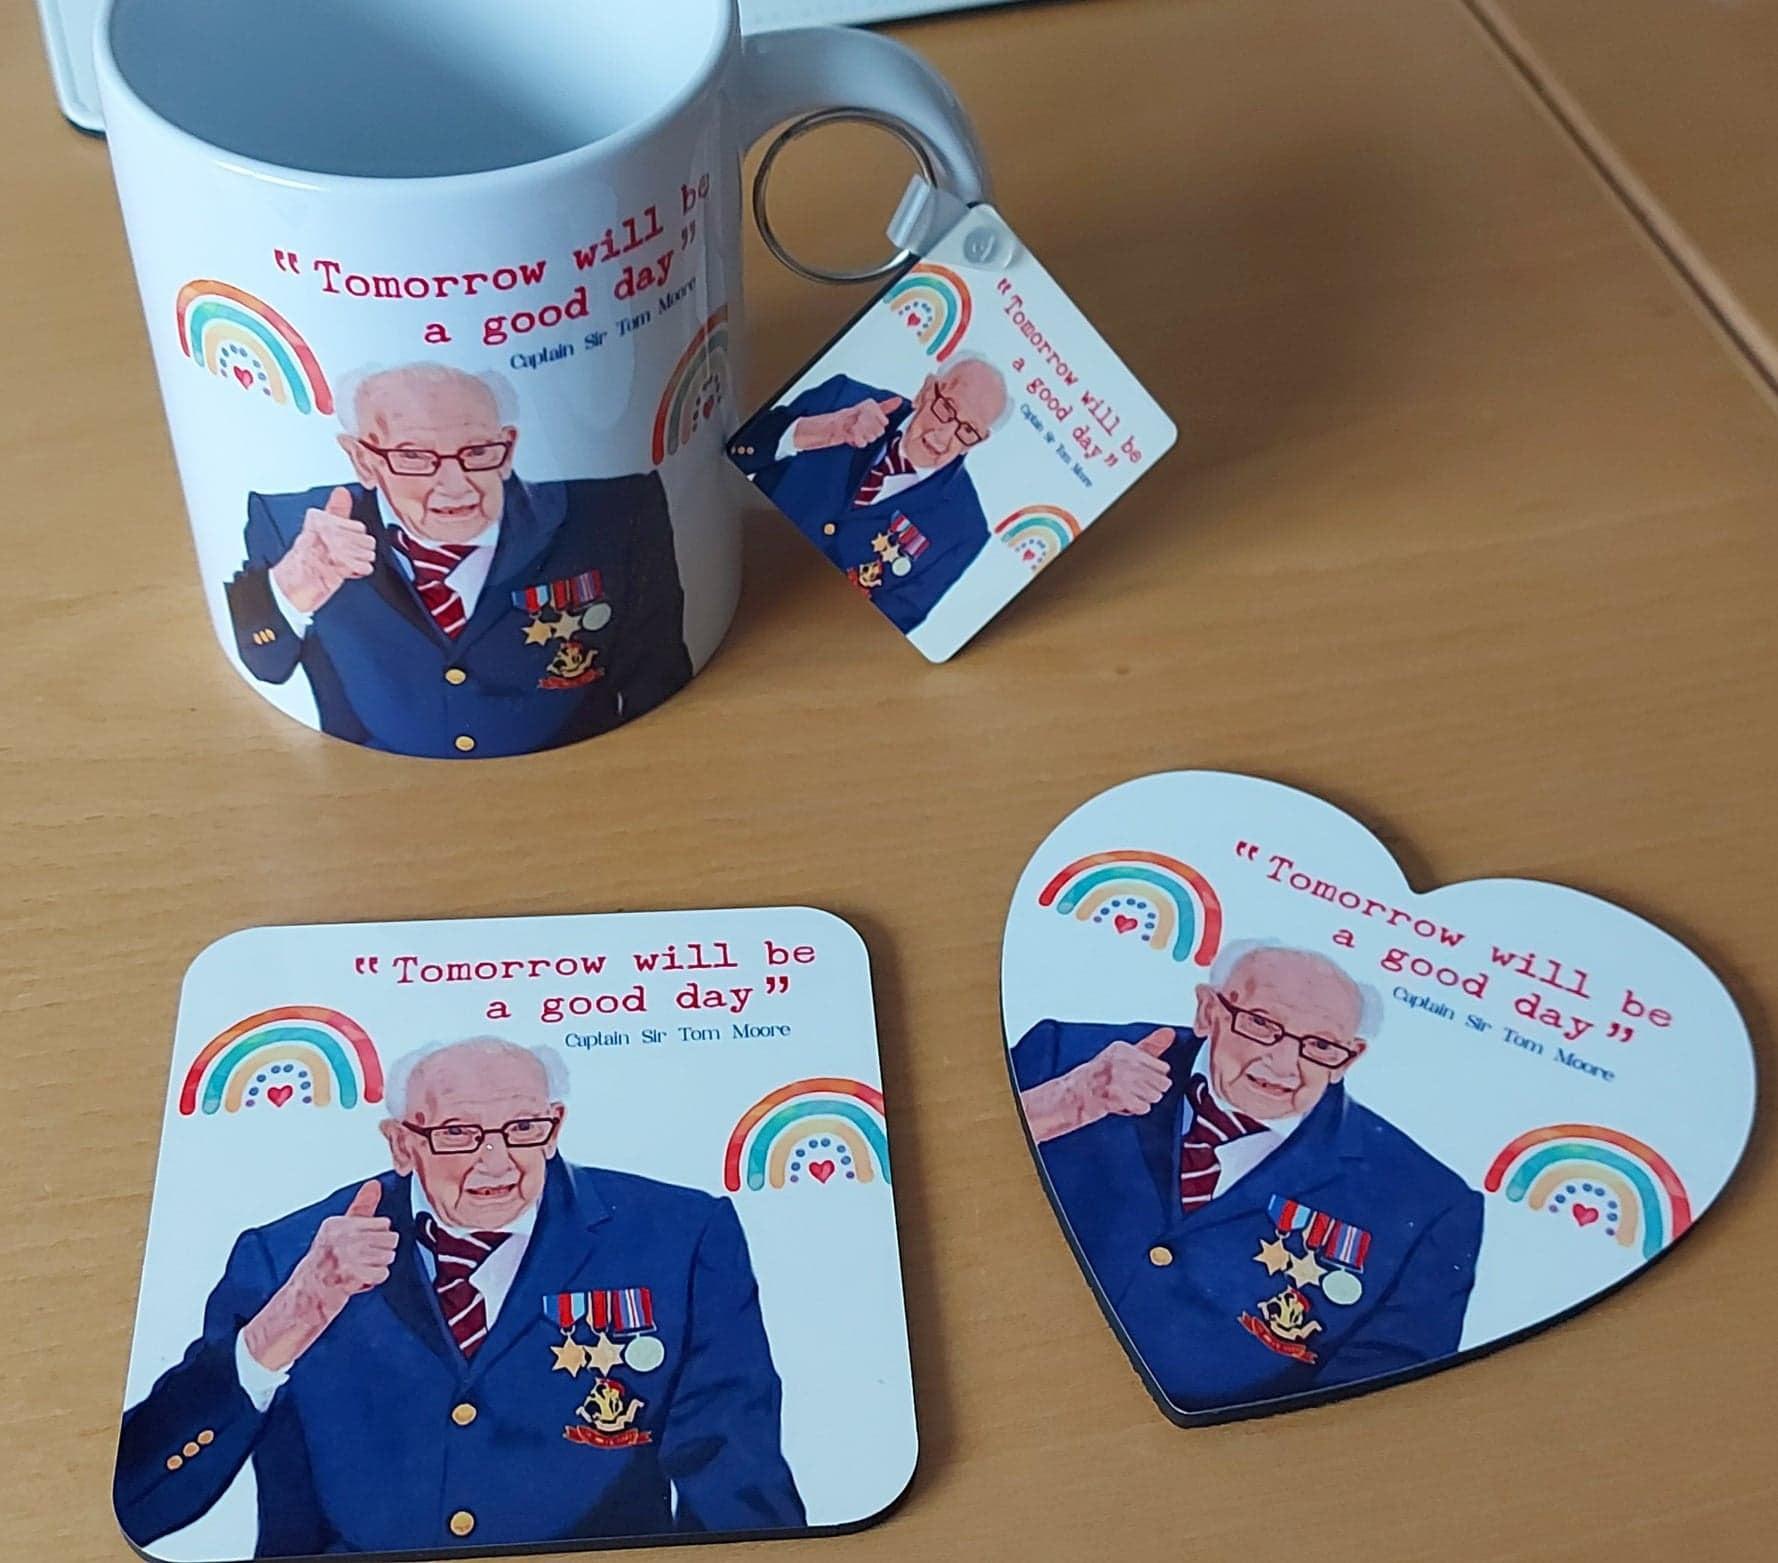 NHS Hero-Captain Sir Tom Moore - Tomorrow will be a good day - Inspirational - motivational heart shaped coaster - NHS -Rainbow